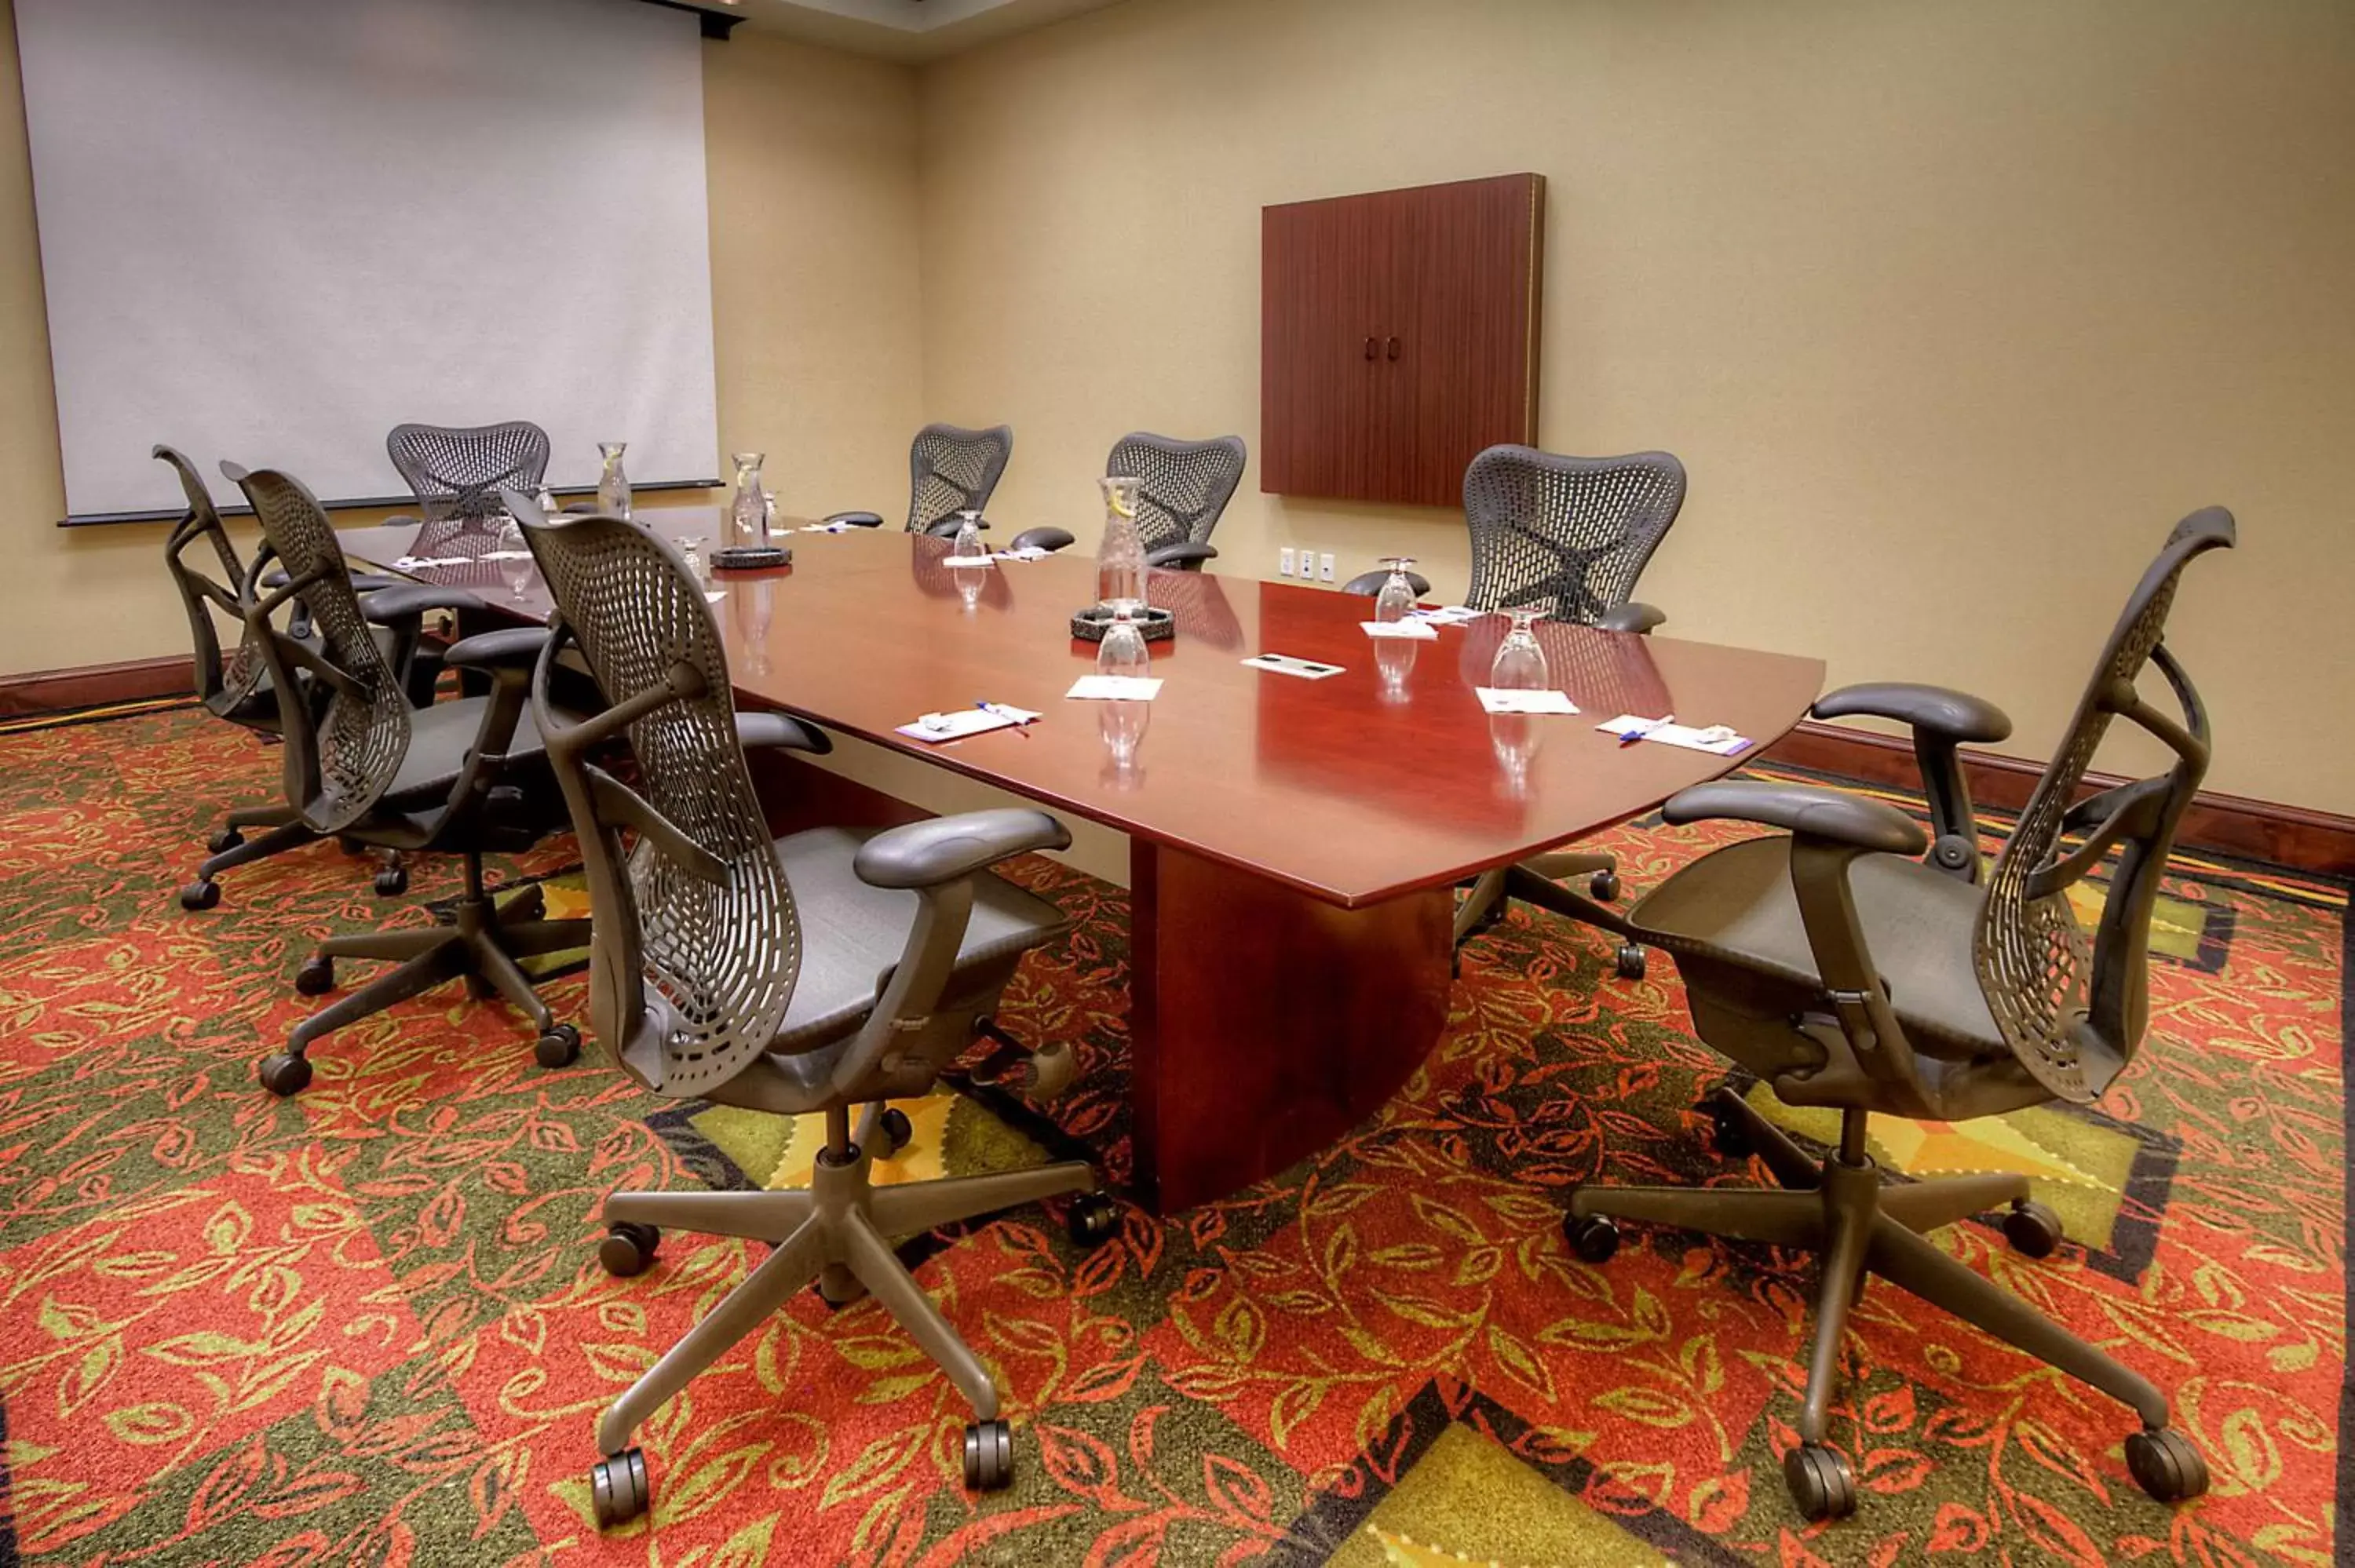 Meeting/conference room in Hilton Garden Inn Great Falls